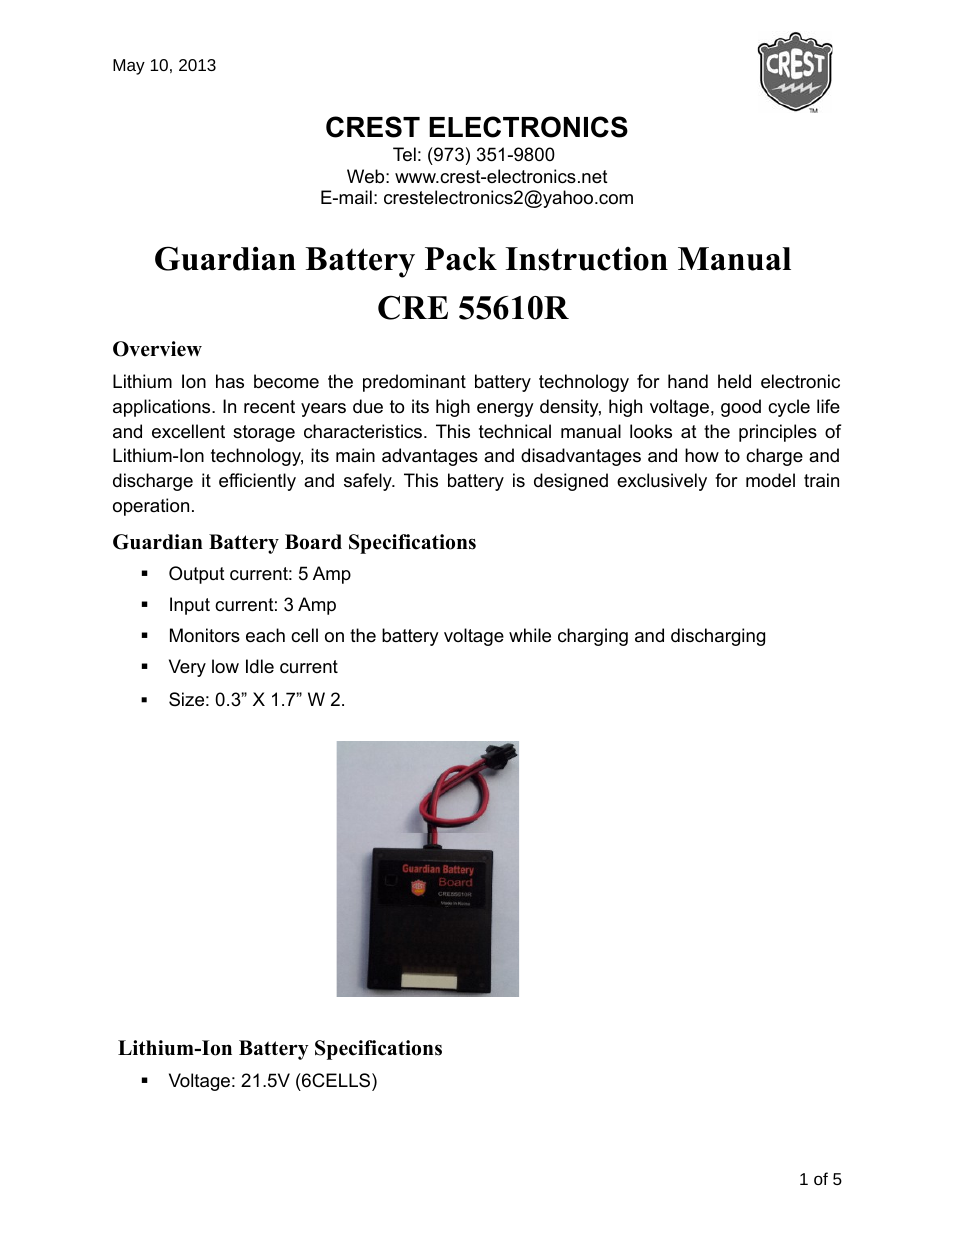 CRE55610R GUARDIAN BATTERY CHARGER